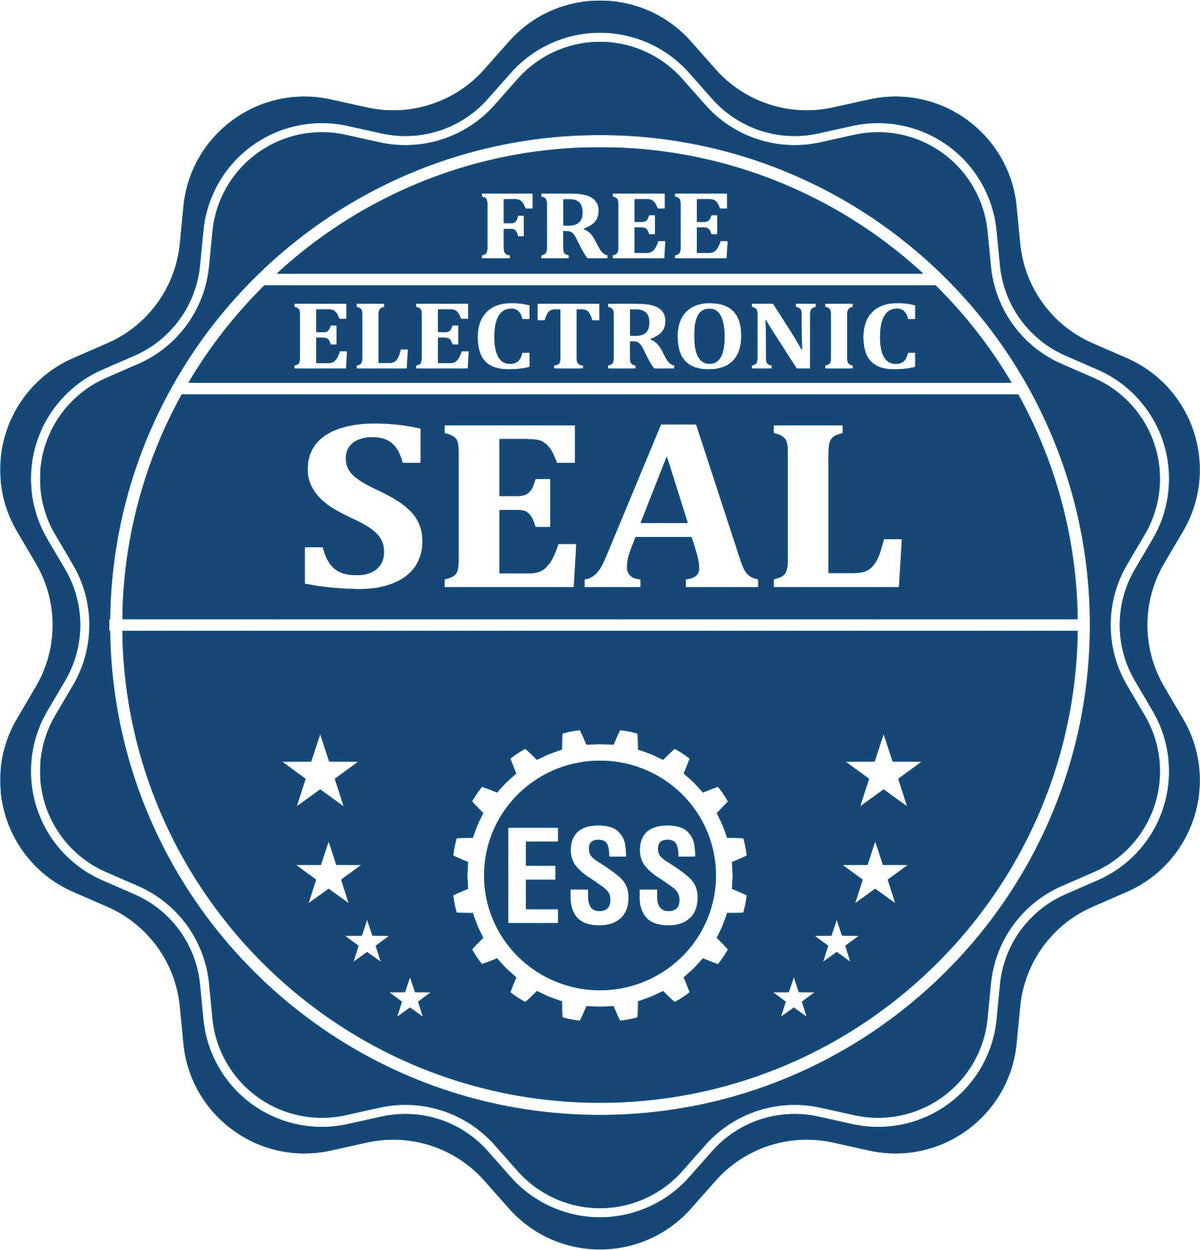 A badge showing a free electronic seal for the Slim Pre-Inked District of Columbia Land Surveyor Seal Stamp with stars and the ESS gear on the emblem.